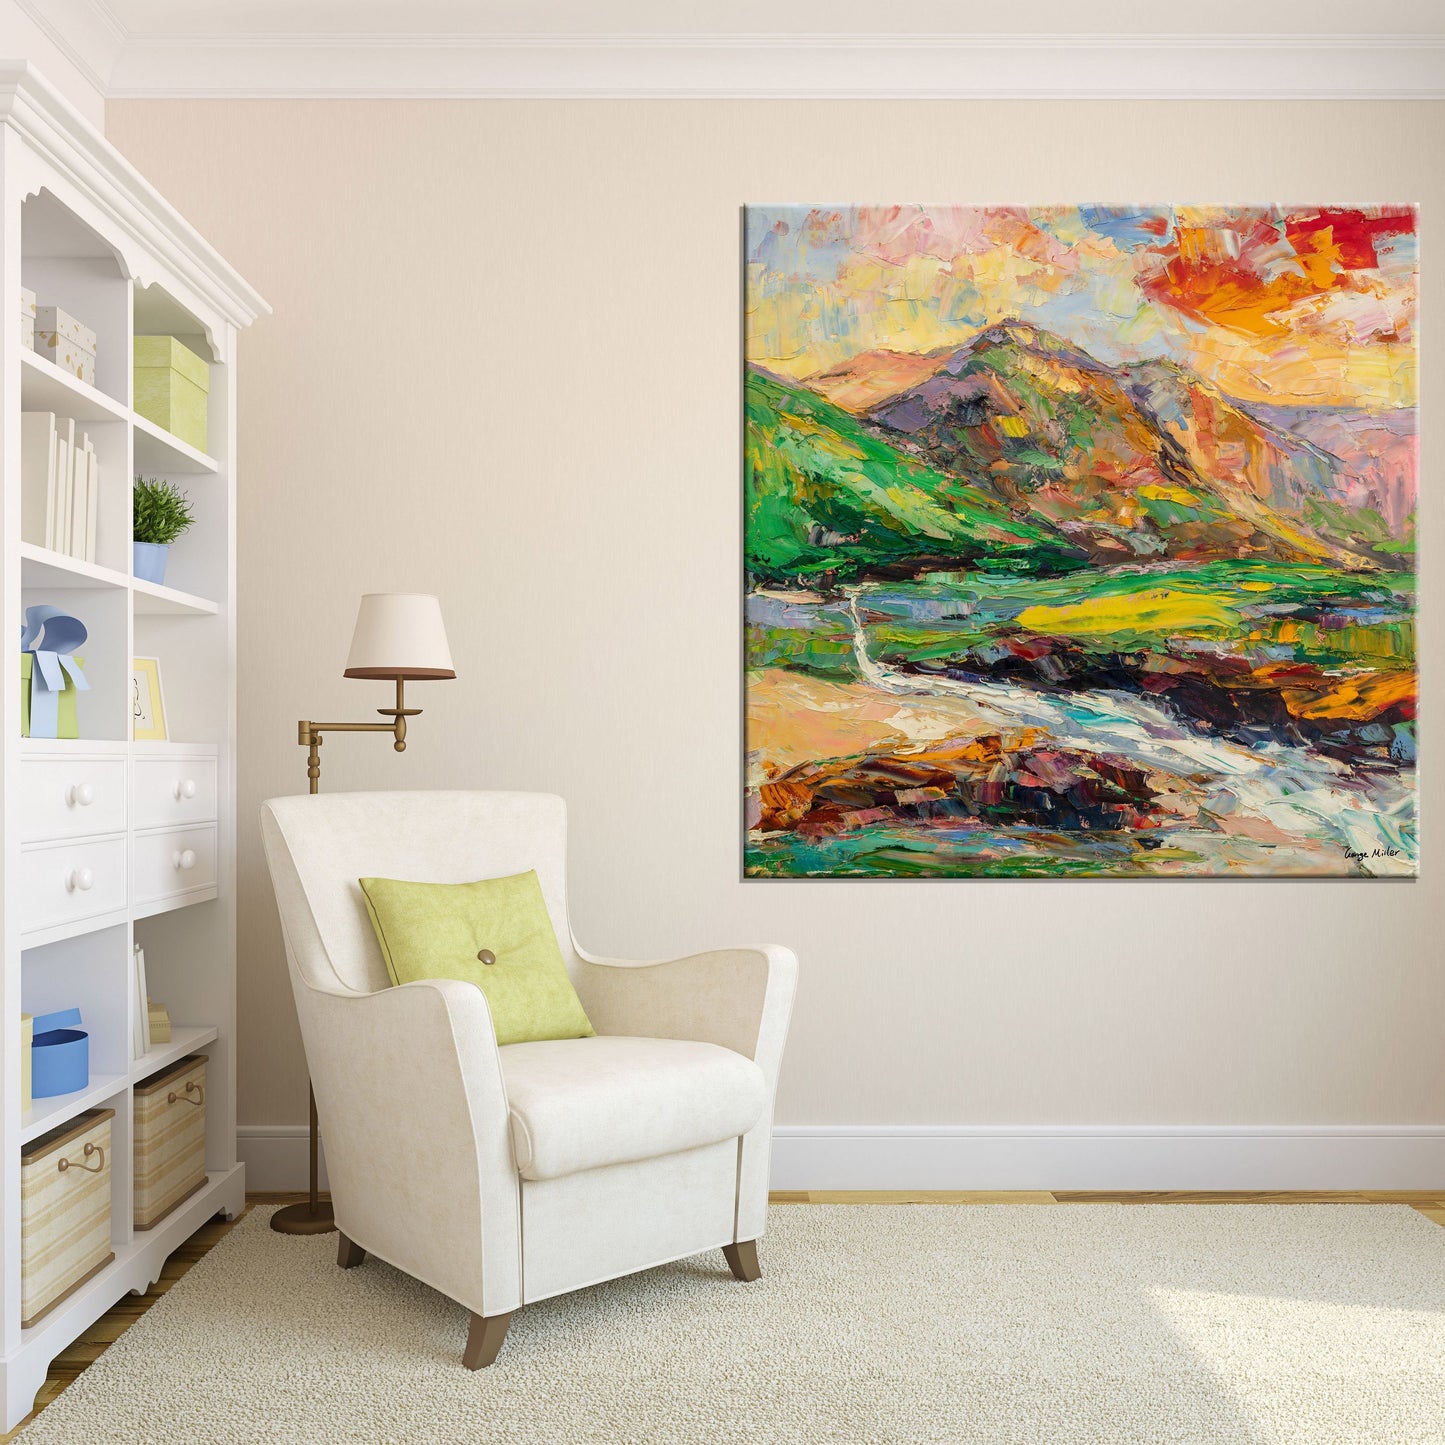 Oil Painting Landscape, Abstract Painting, Wall Hanging, Living Room Decor, Oil Painting Original, Modern Art, Large Canvas Art, Canvas Art